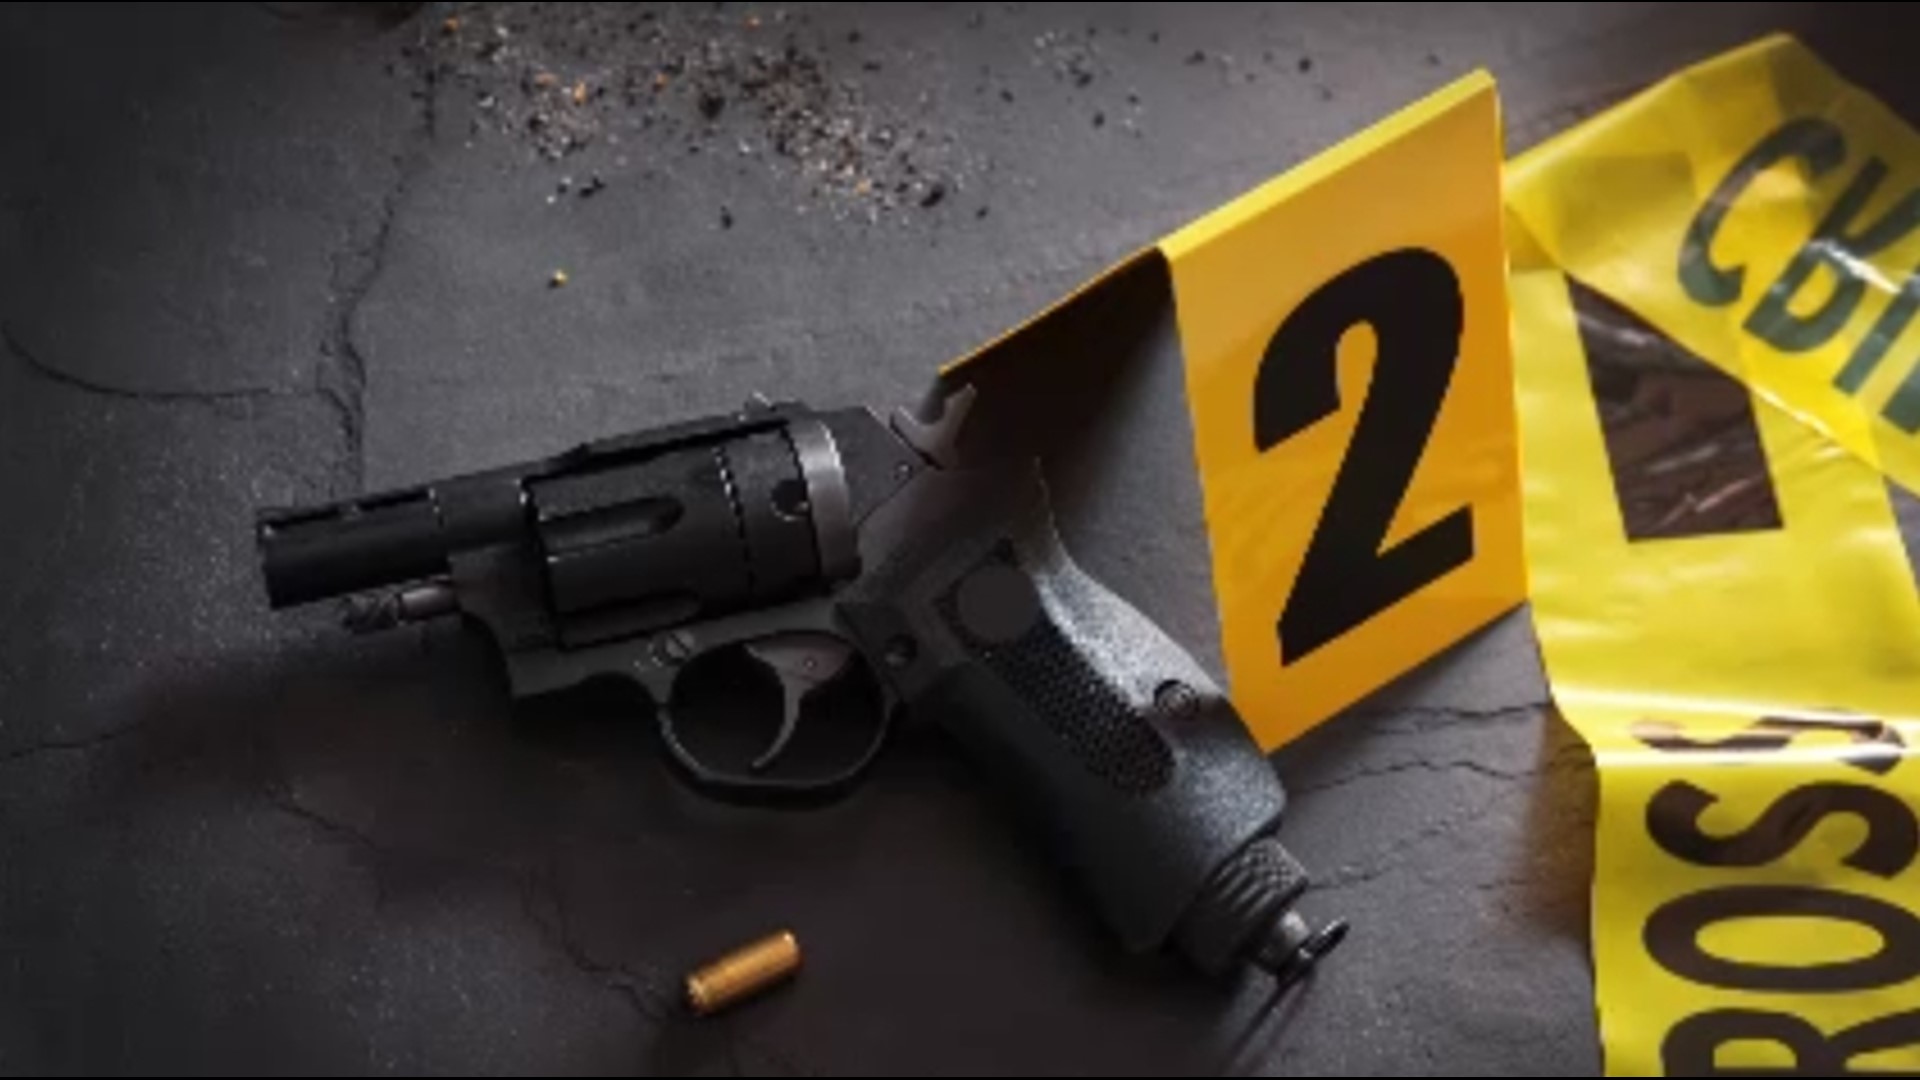 Fort Stockton Police, Pecos County Sheriff's Office, Texas DPS and the Texas Rangers responded to a call Wednesday evening regarding gunshots.